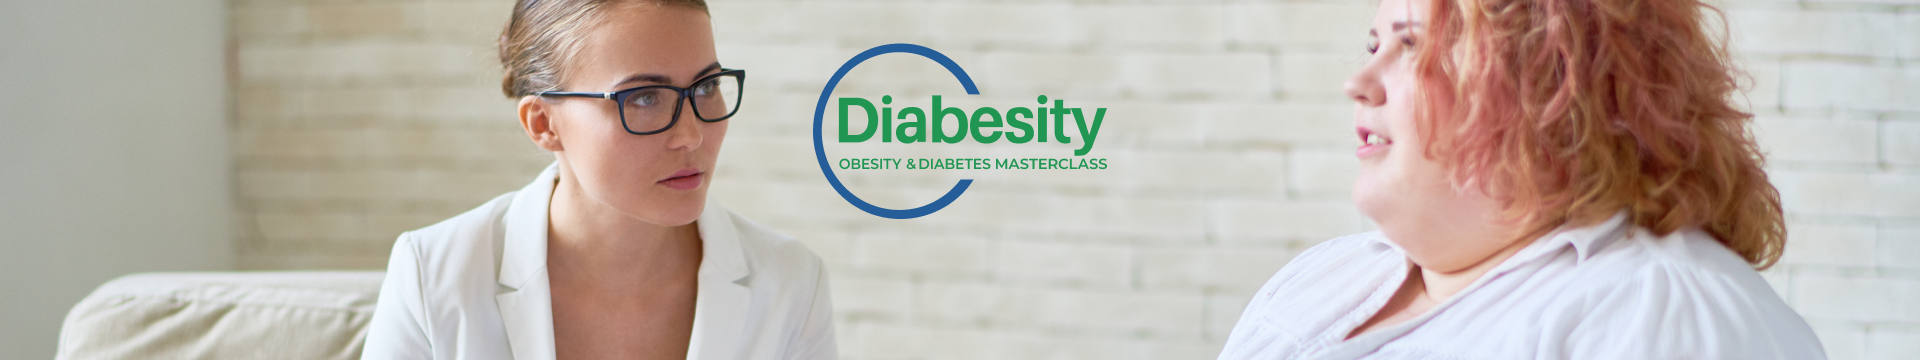 Diabesity: Improving Patient Outcomes in Diagnosis and Management | Obesity & Diabetes Masterclass